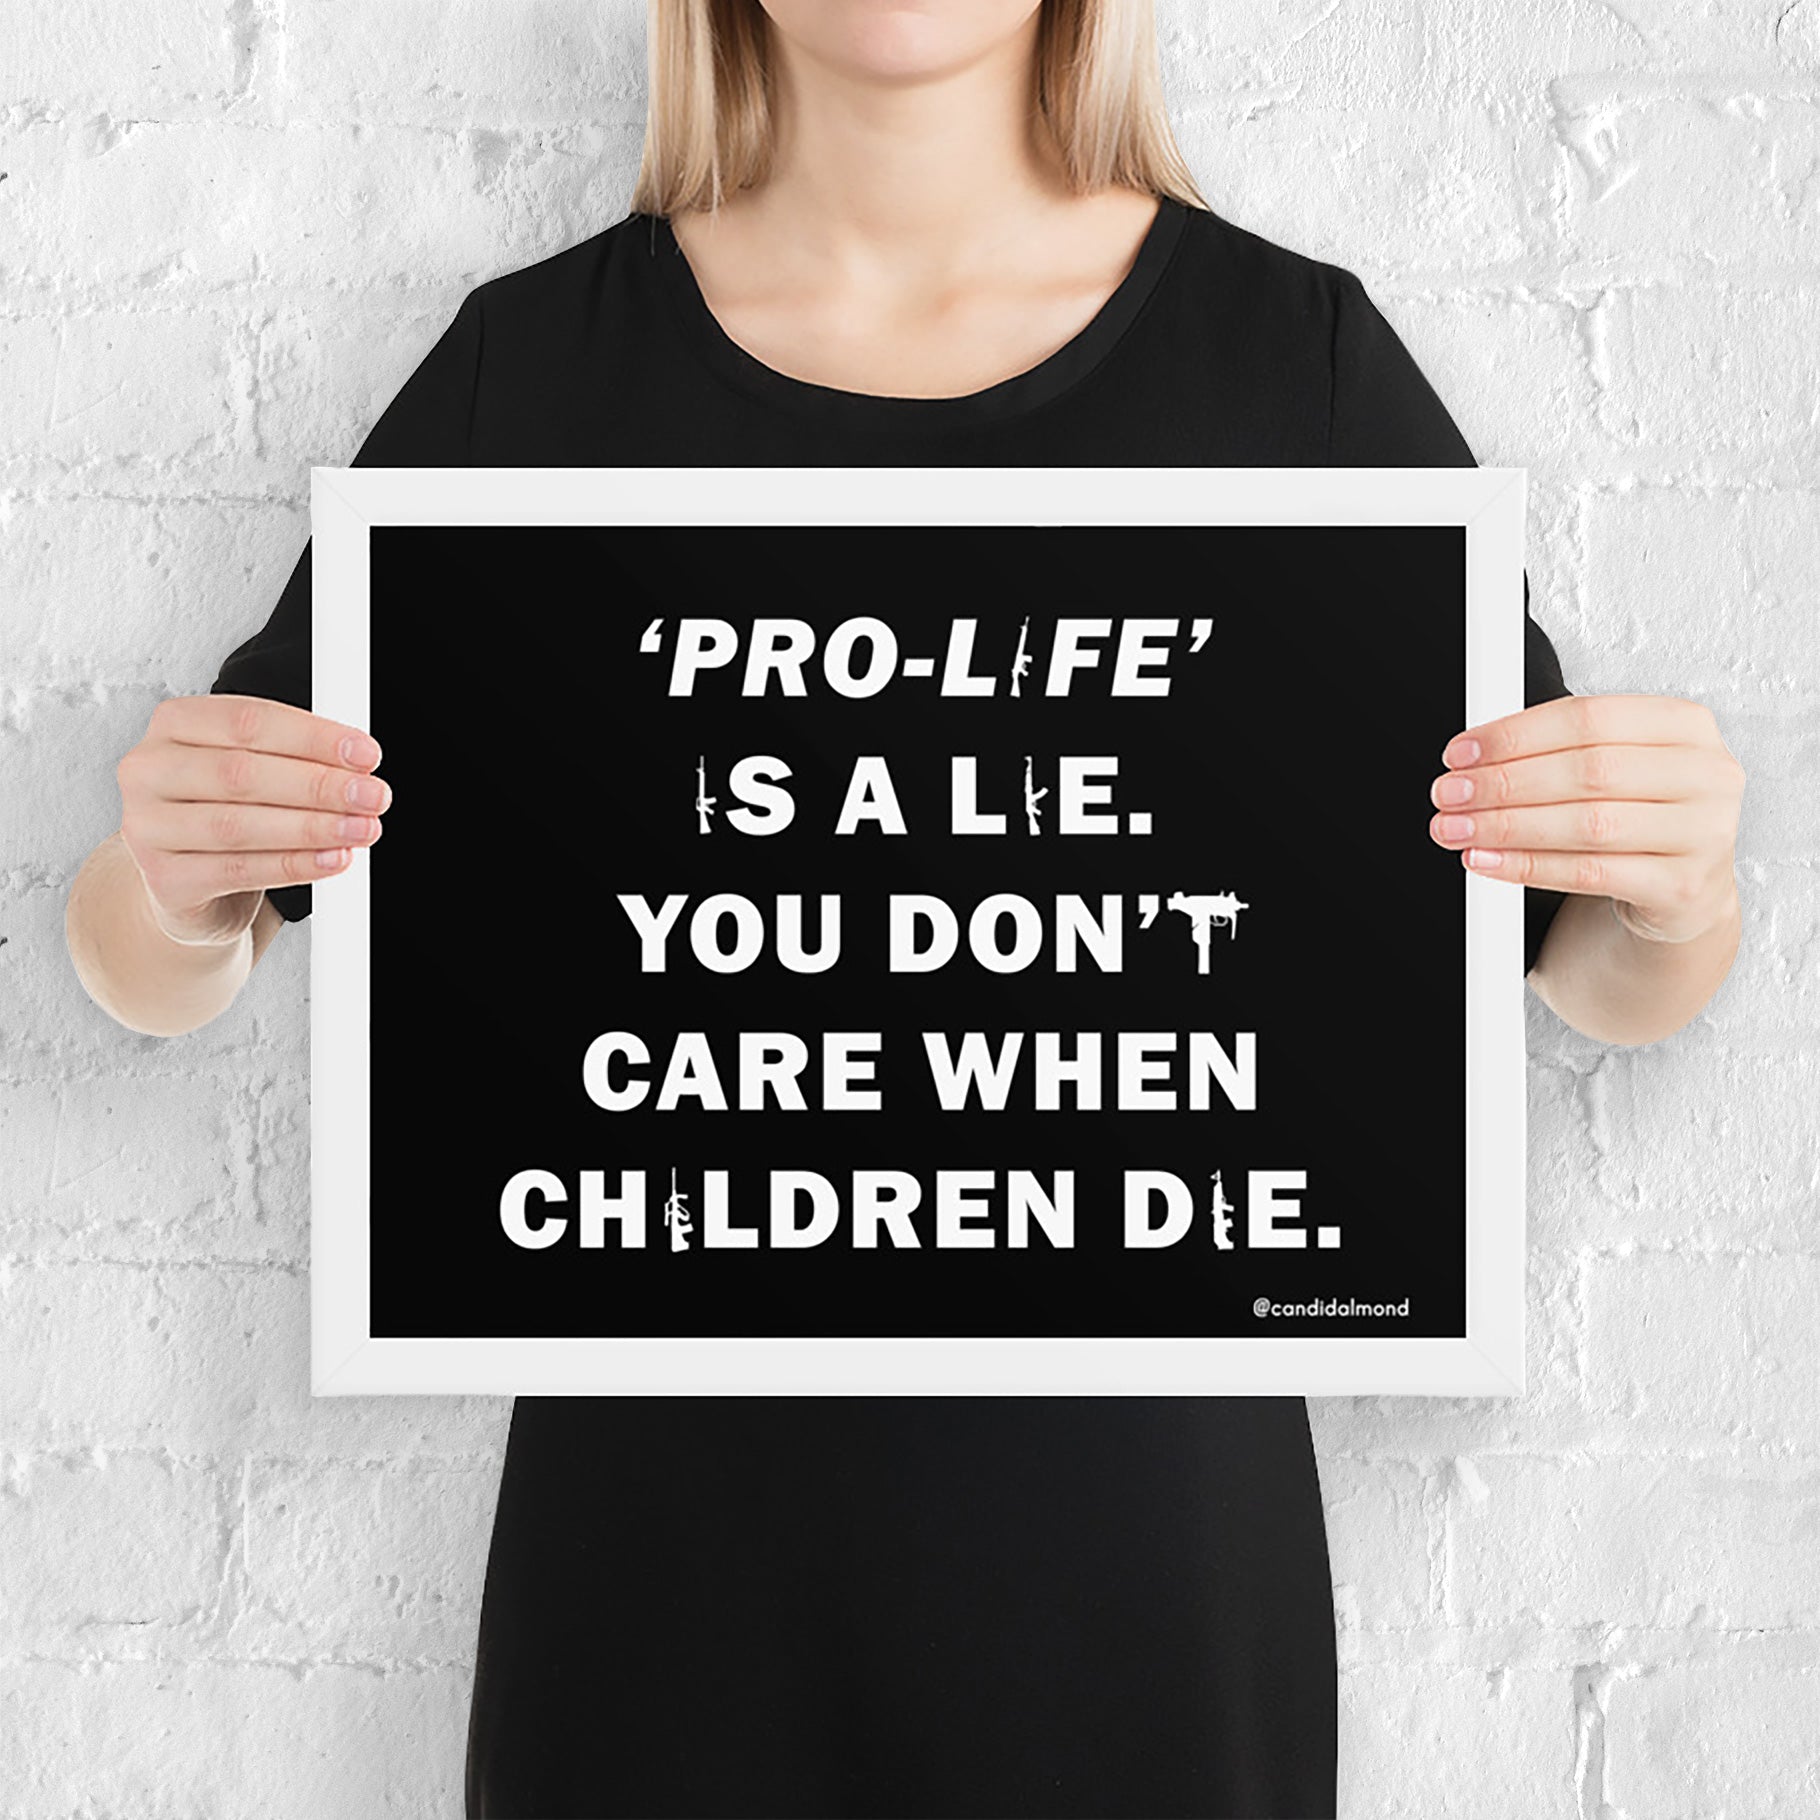 Abortion rights and gun control protest poster, white frame, size 16" x 12"